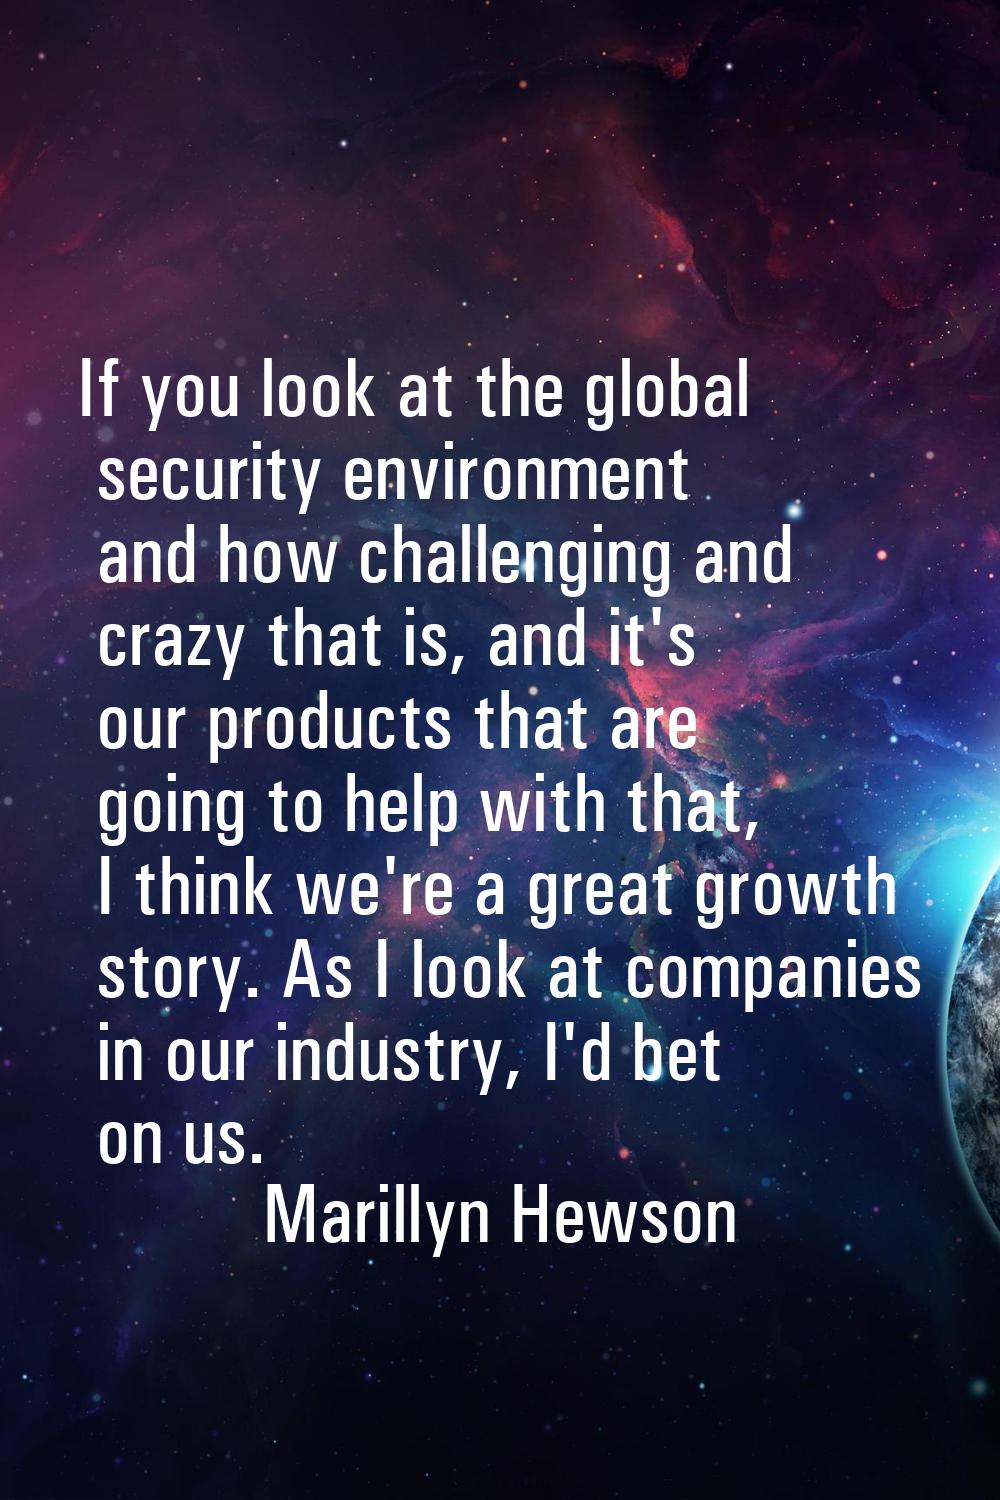 If you look at the global security environment and how challenging and crazy that is, and it's our 